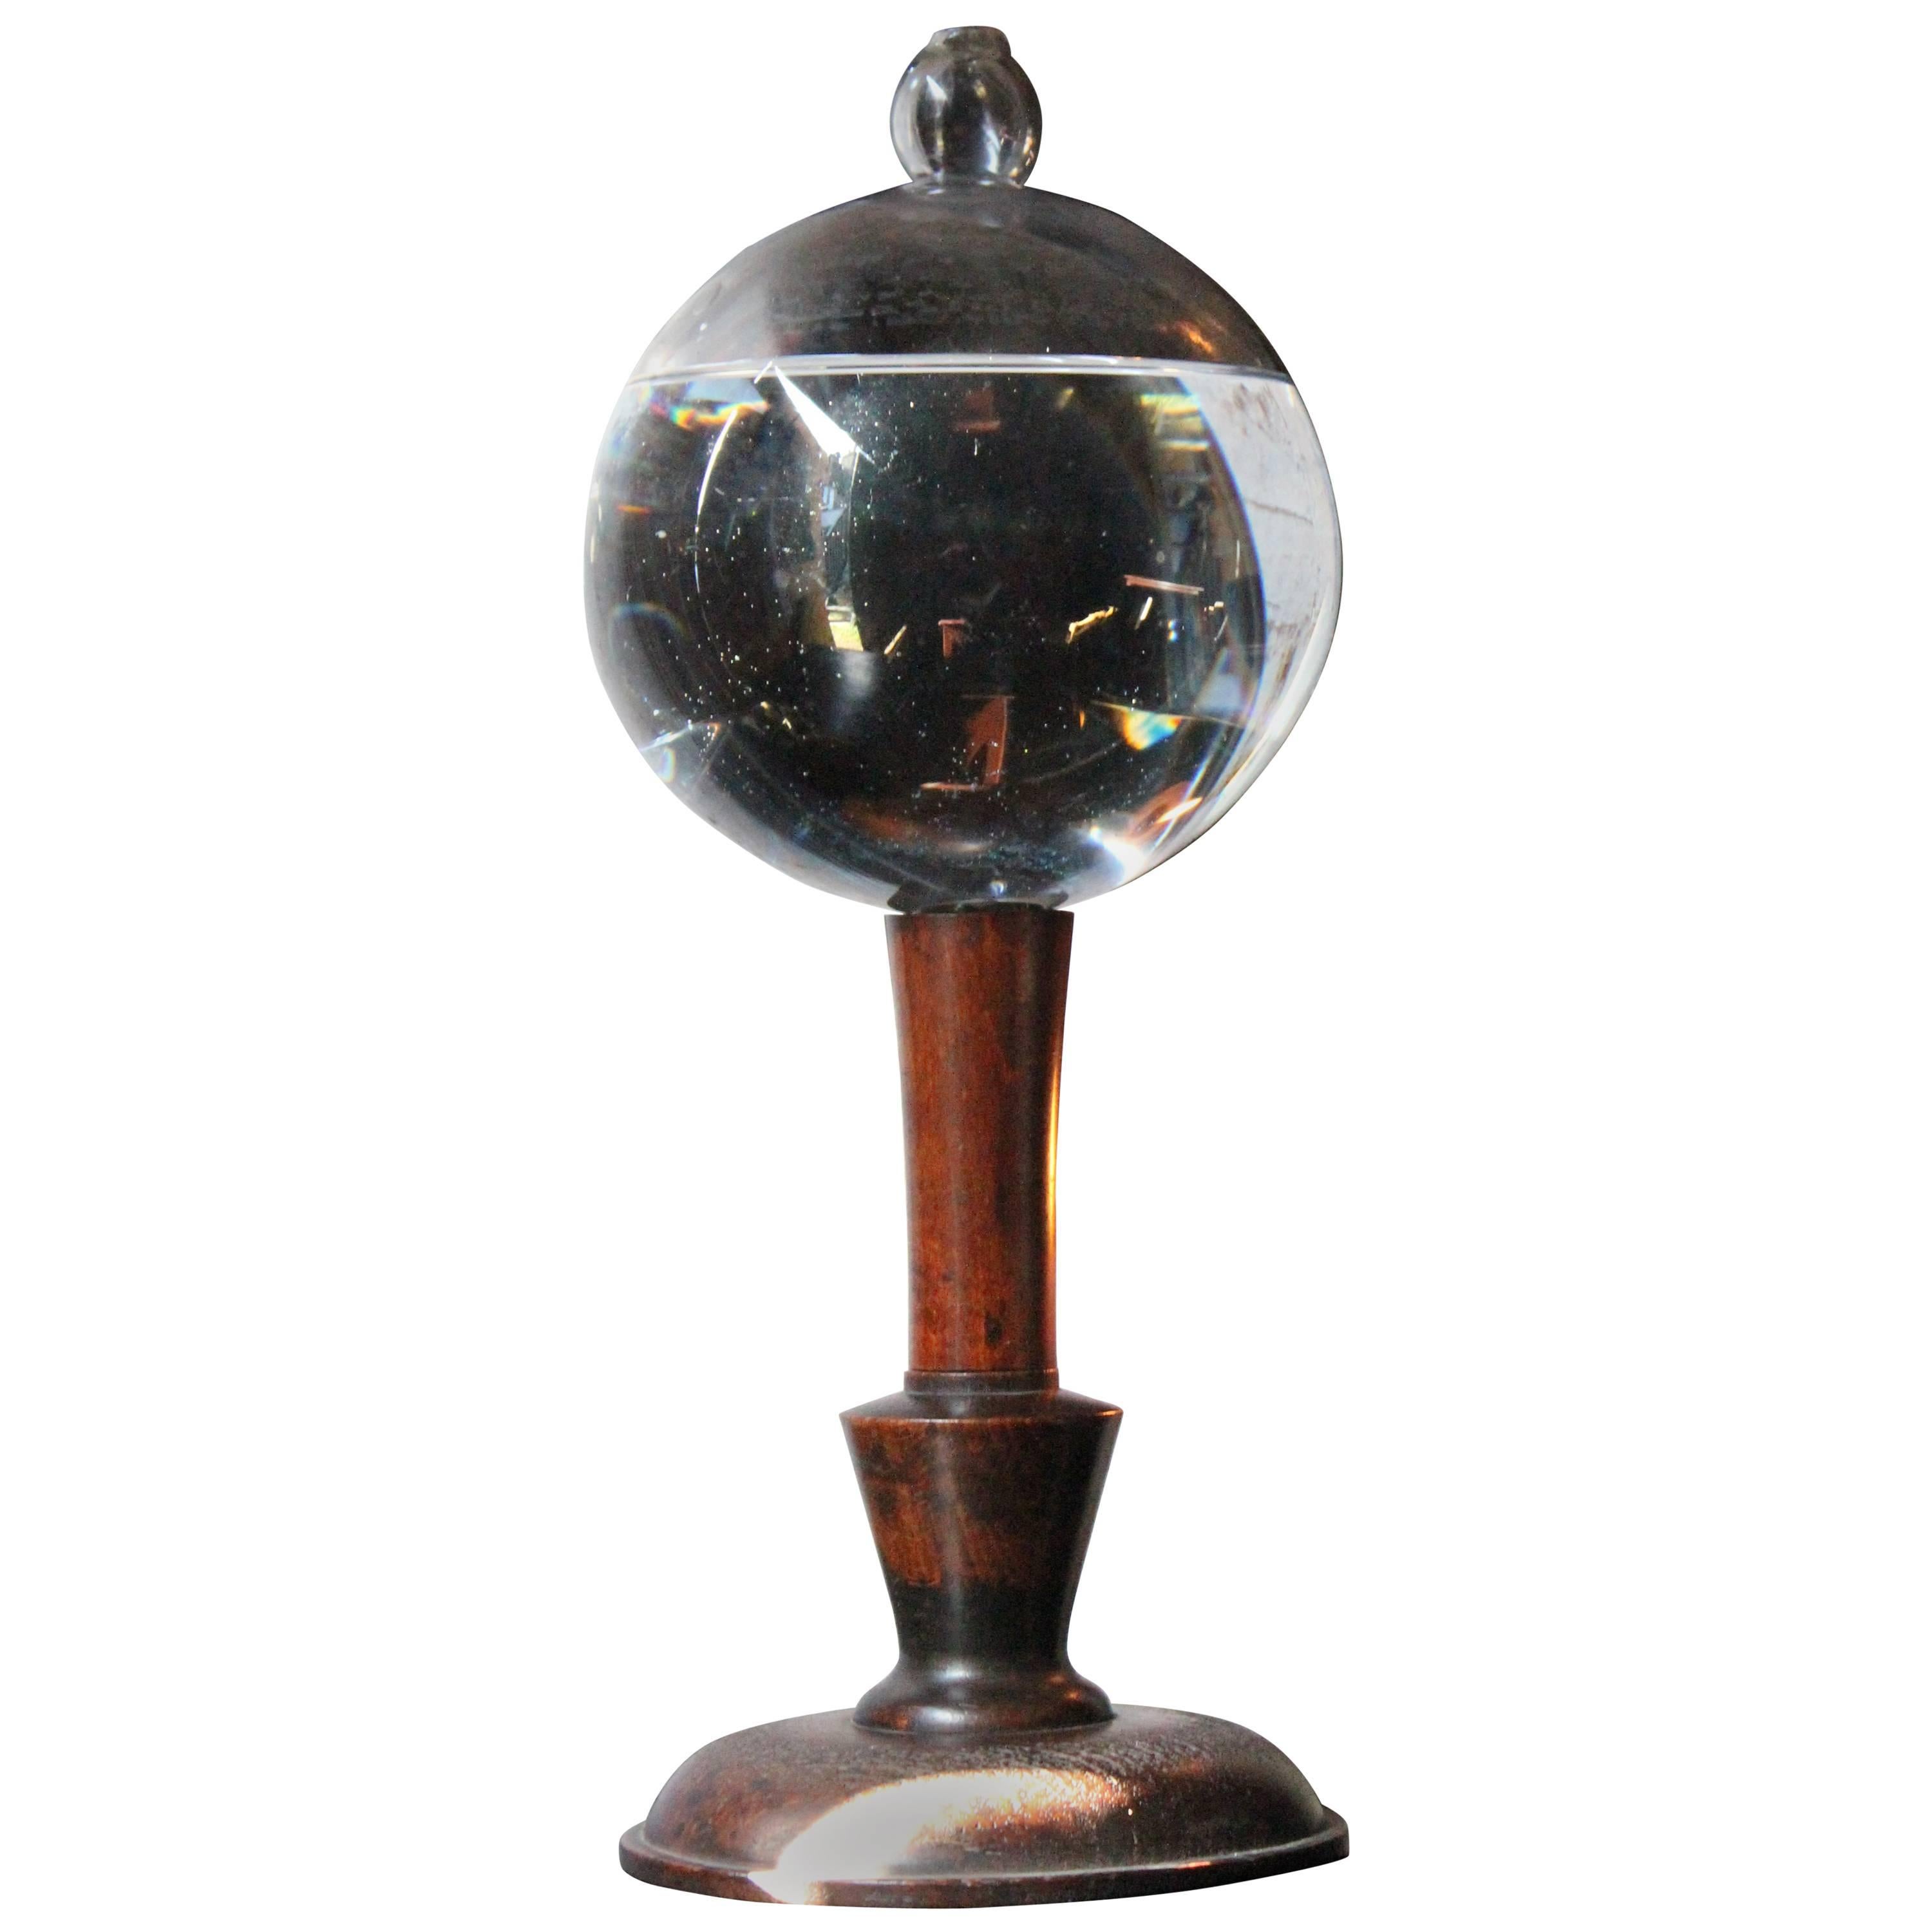 Early 19th Century Lace Makers Magnifying Flask or Flash Globe on Stand